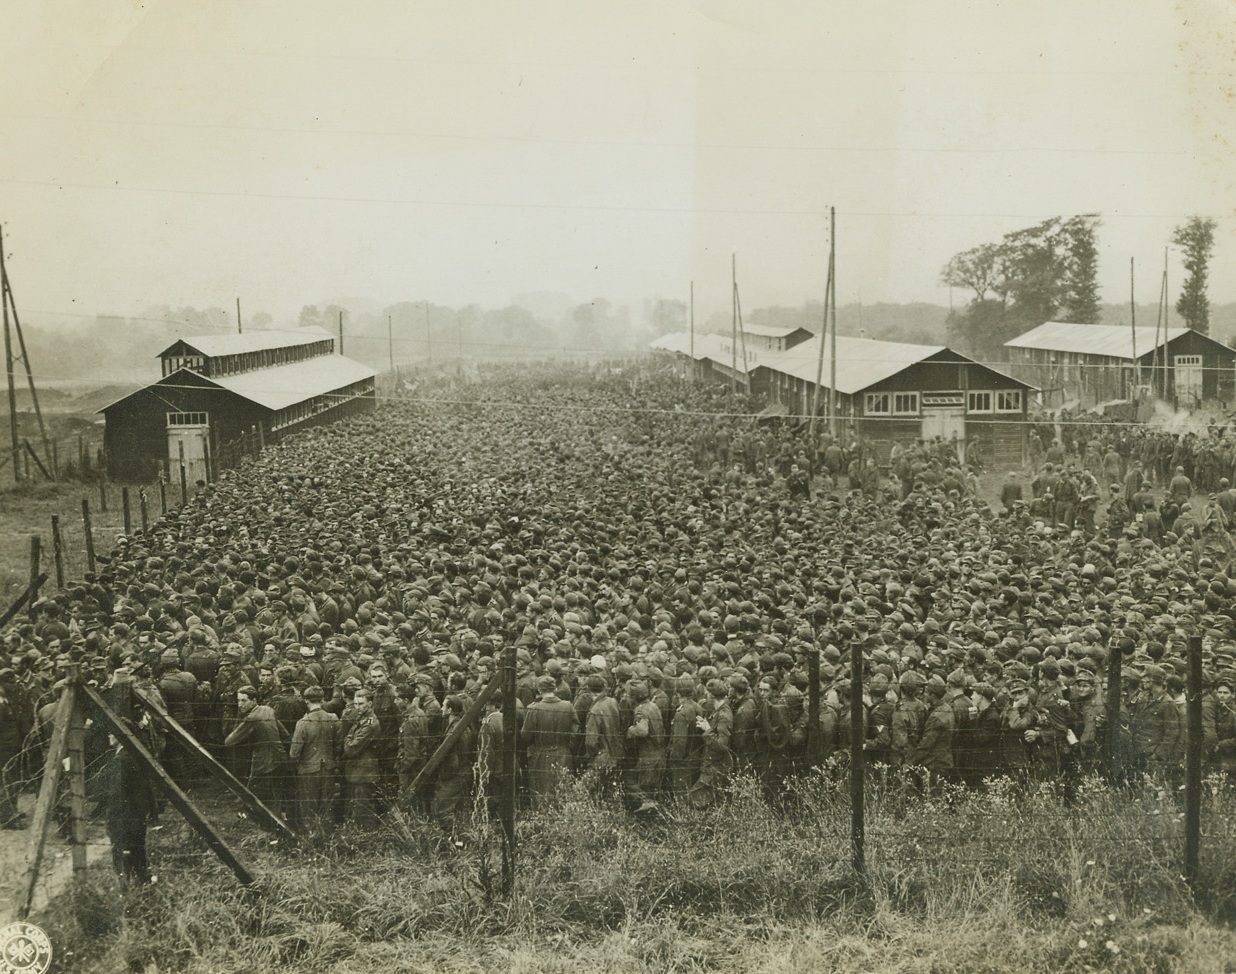 Ten Thousand Hungry “Supermen”, 8/29/1944. France – In this compact mass, stretching far into the background, are ten thousand German prisoners, captured during the Allied drive in France. It’s “chow time” here, and they’re lining up for their lunch in their stockade somewhere in France. Credit: Signal Corps Photo from ACME;